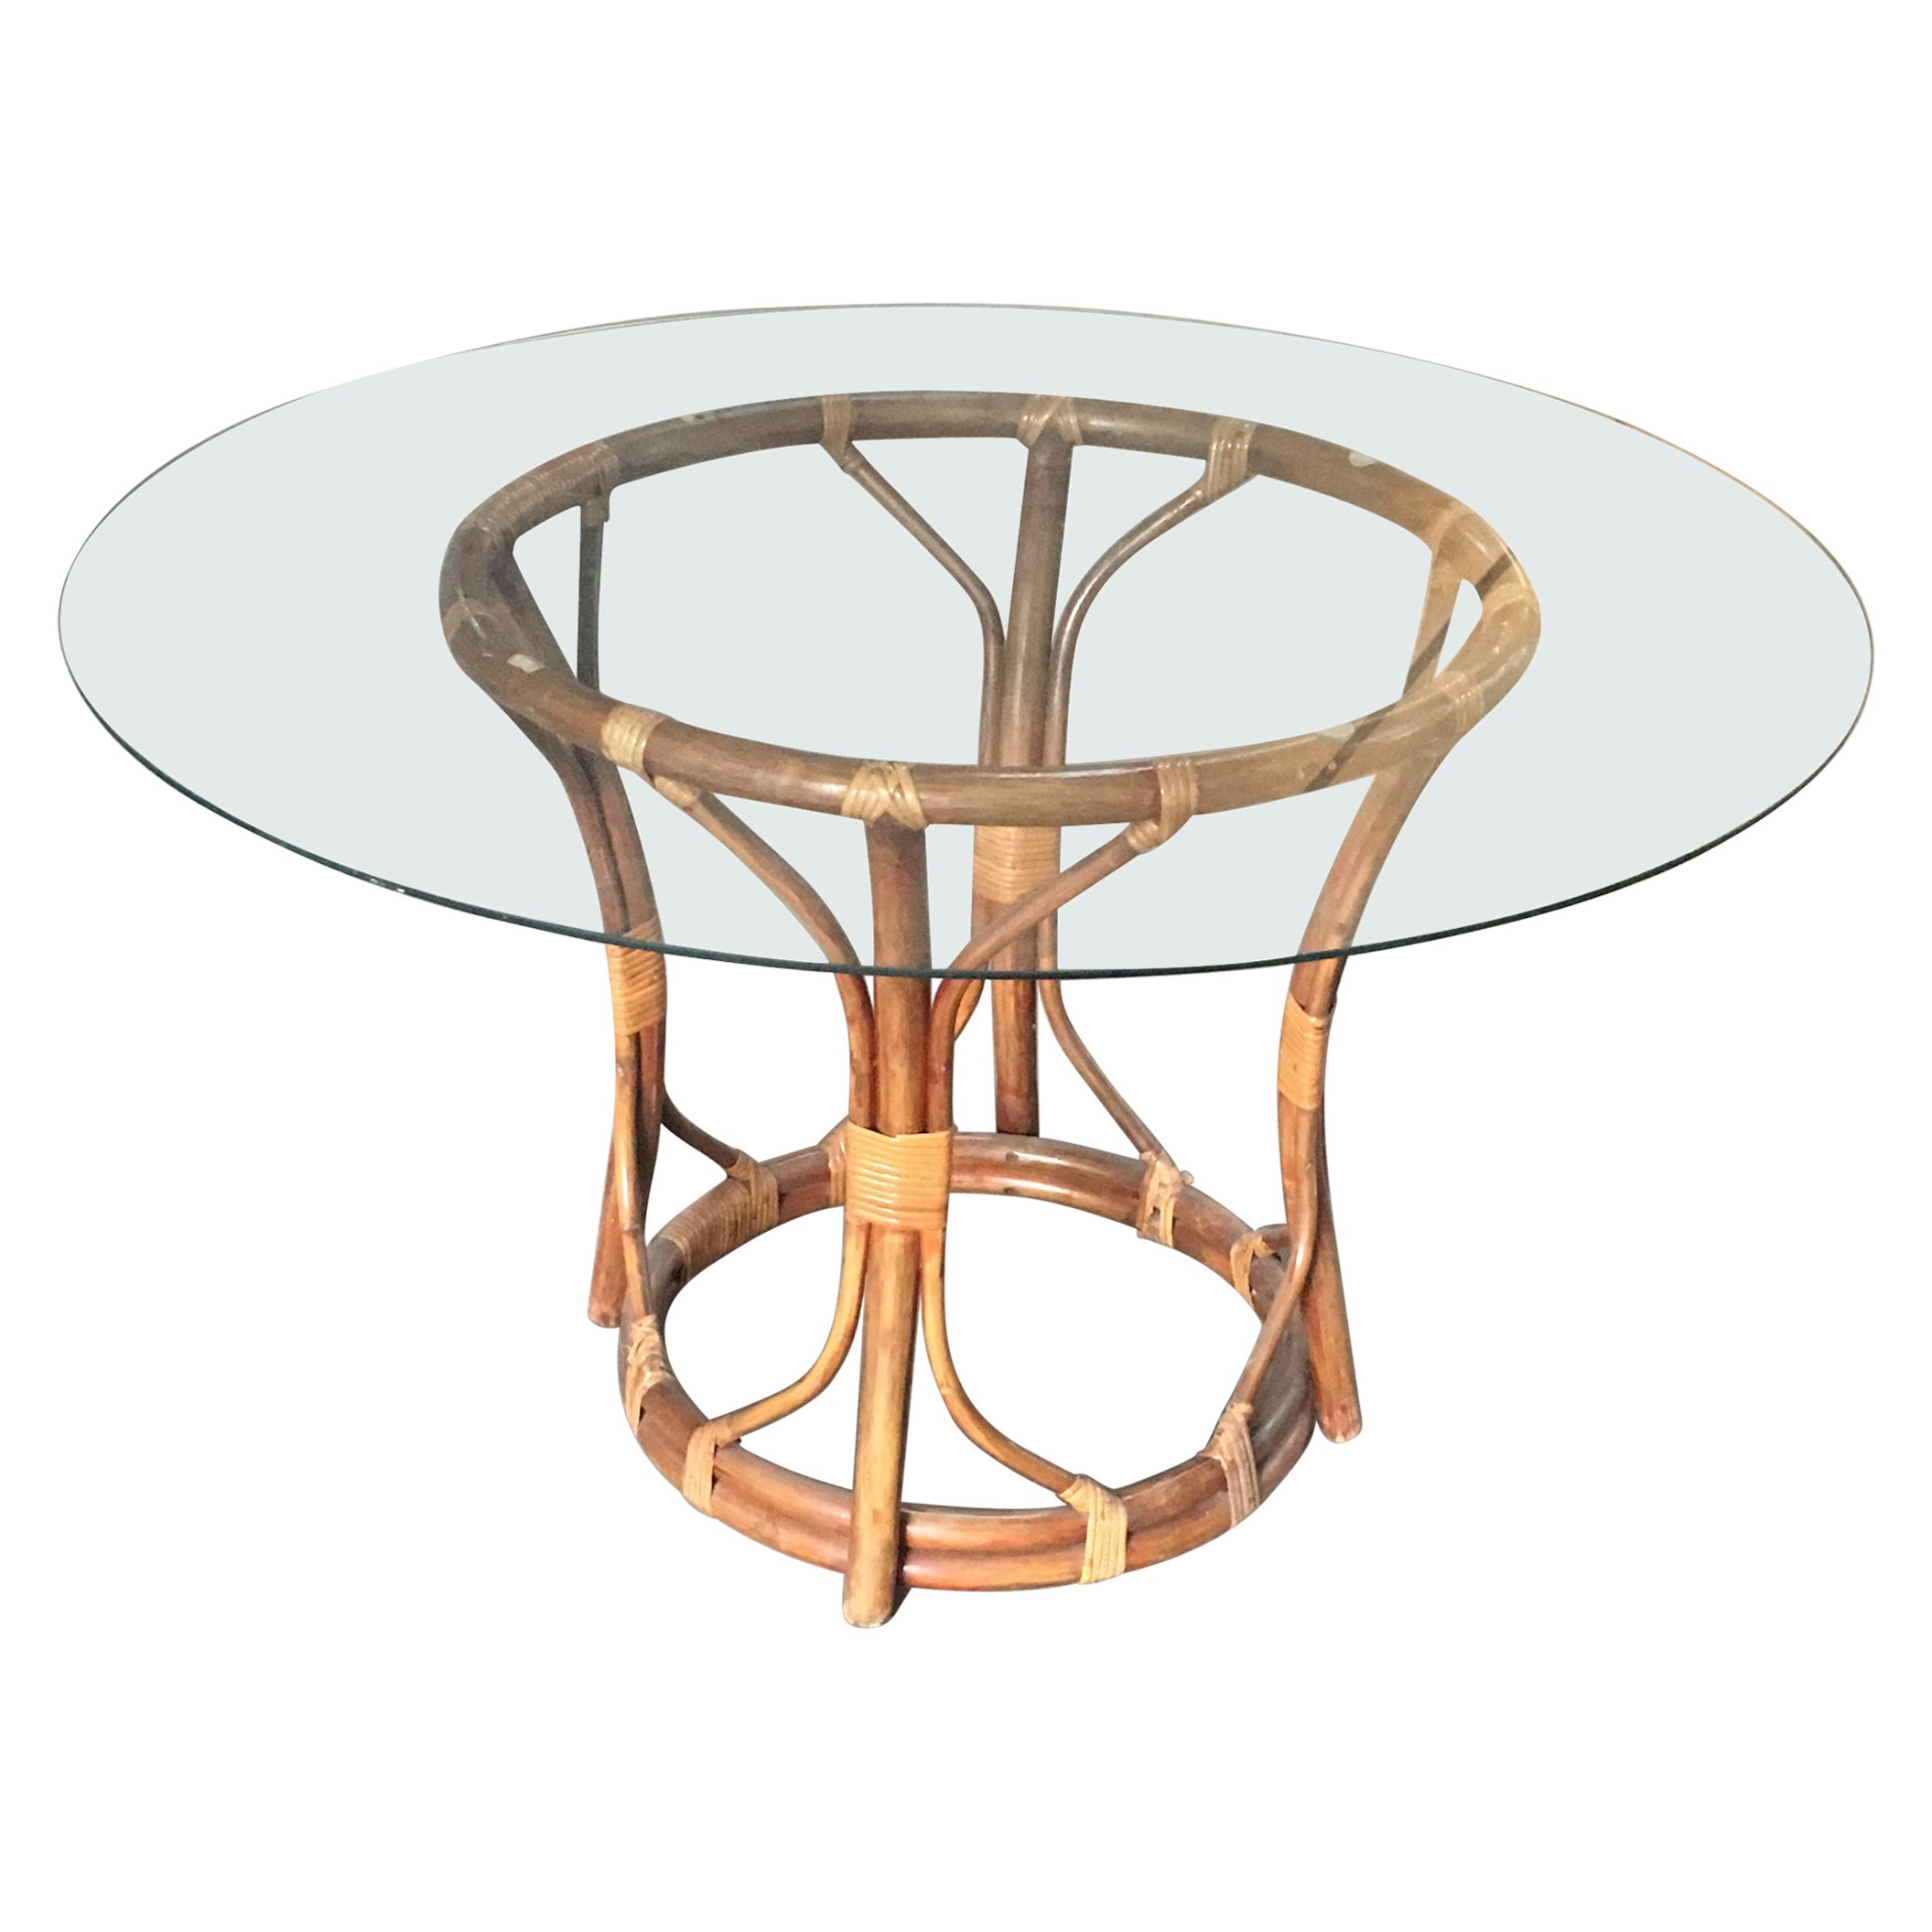 Mid-Century Modern Italian Bamboo and Cane Round Table with Glass Top, 1970s